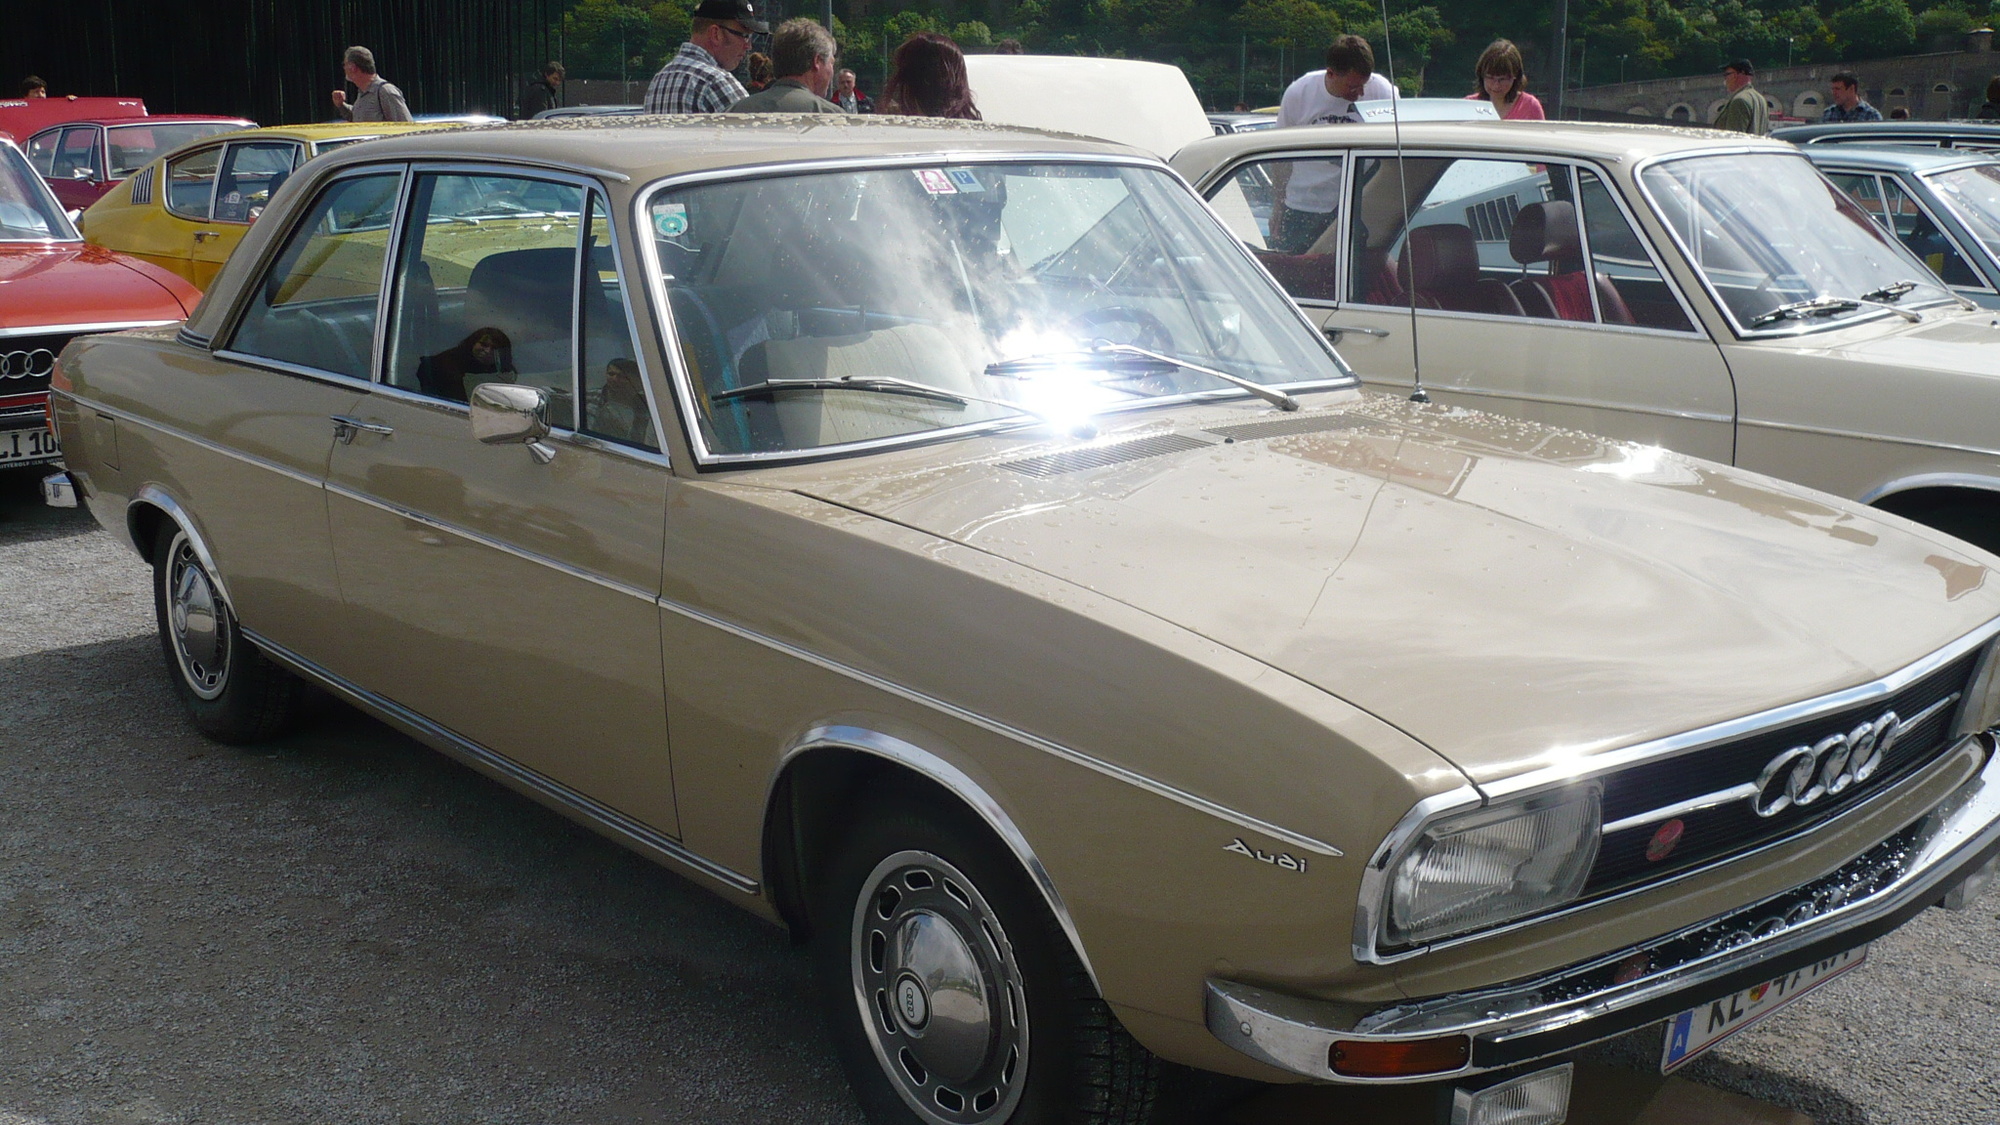 Classic Audi 100 cars at meet in Koblenz, Germany, May 2013